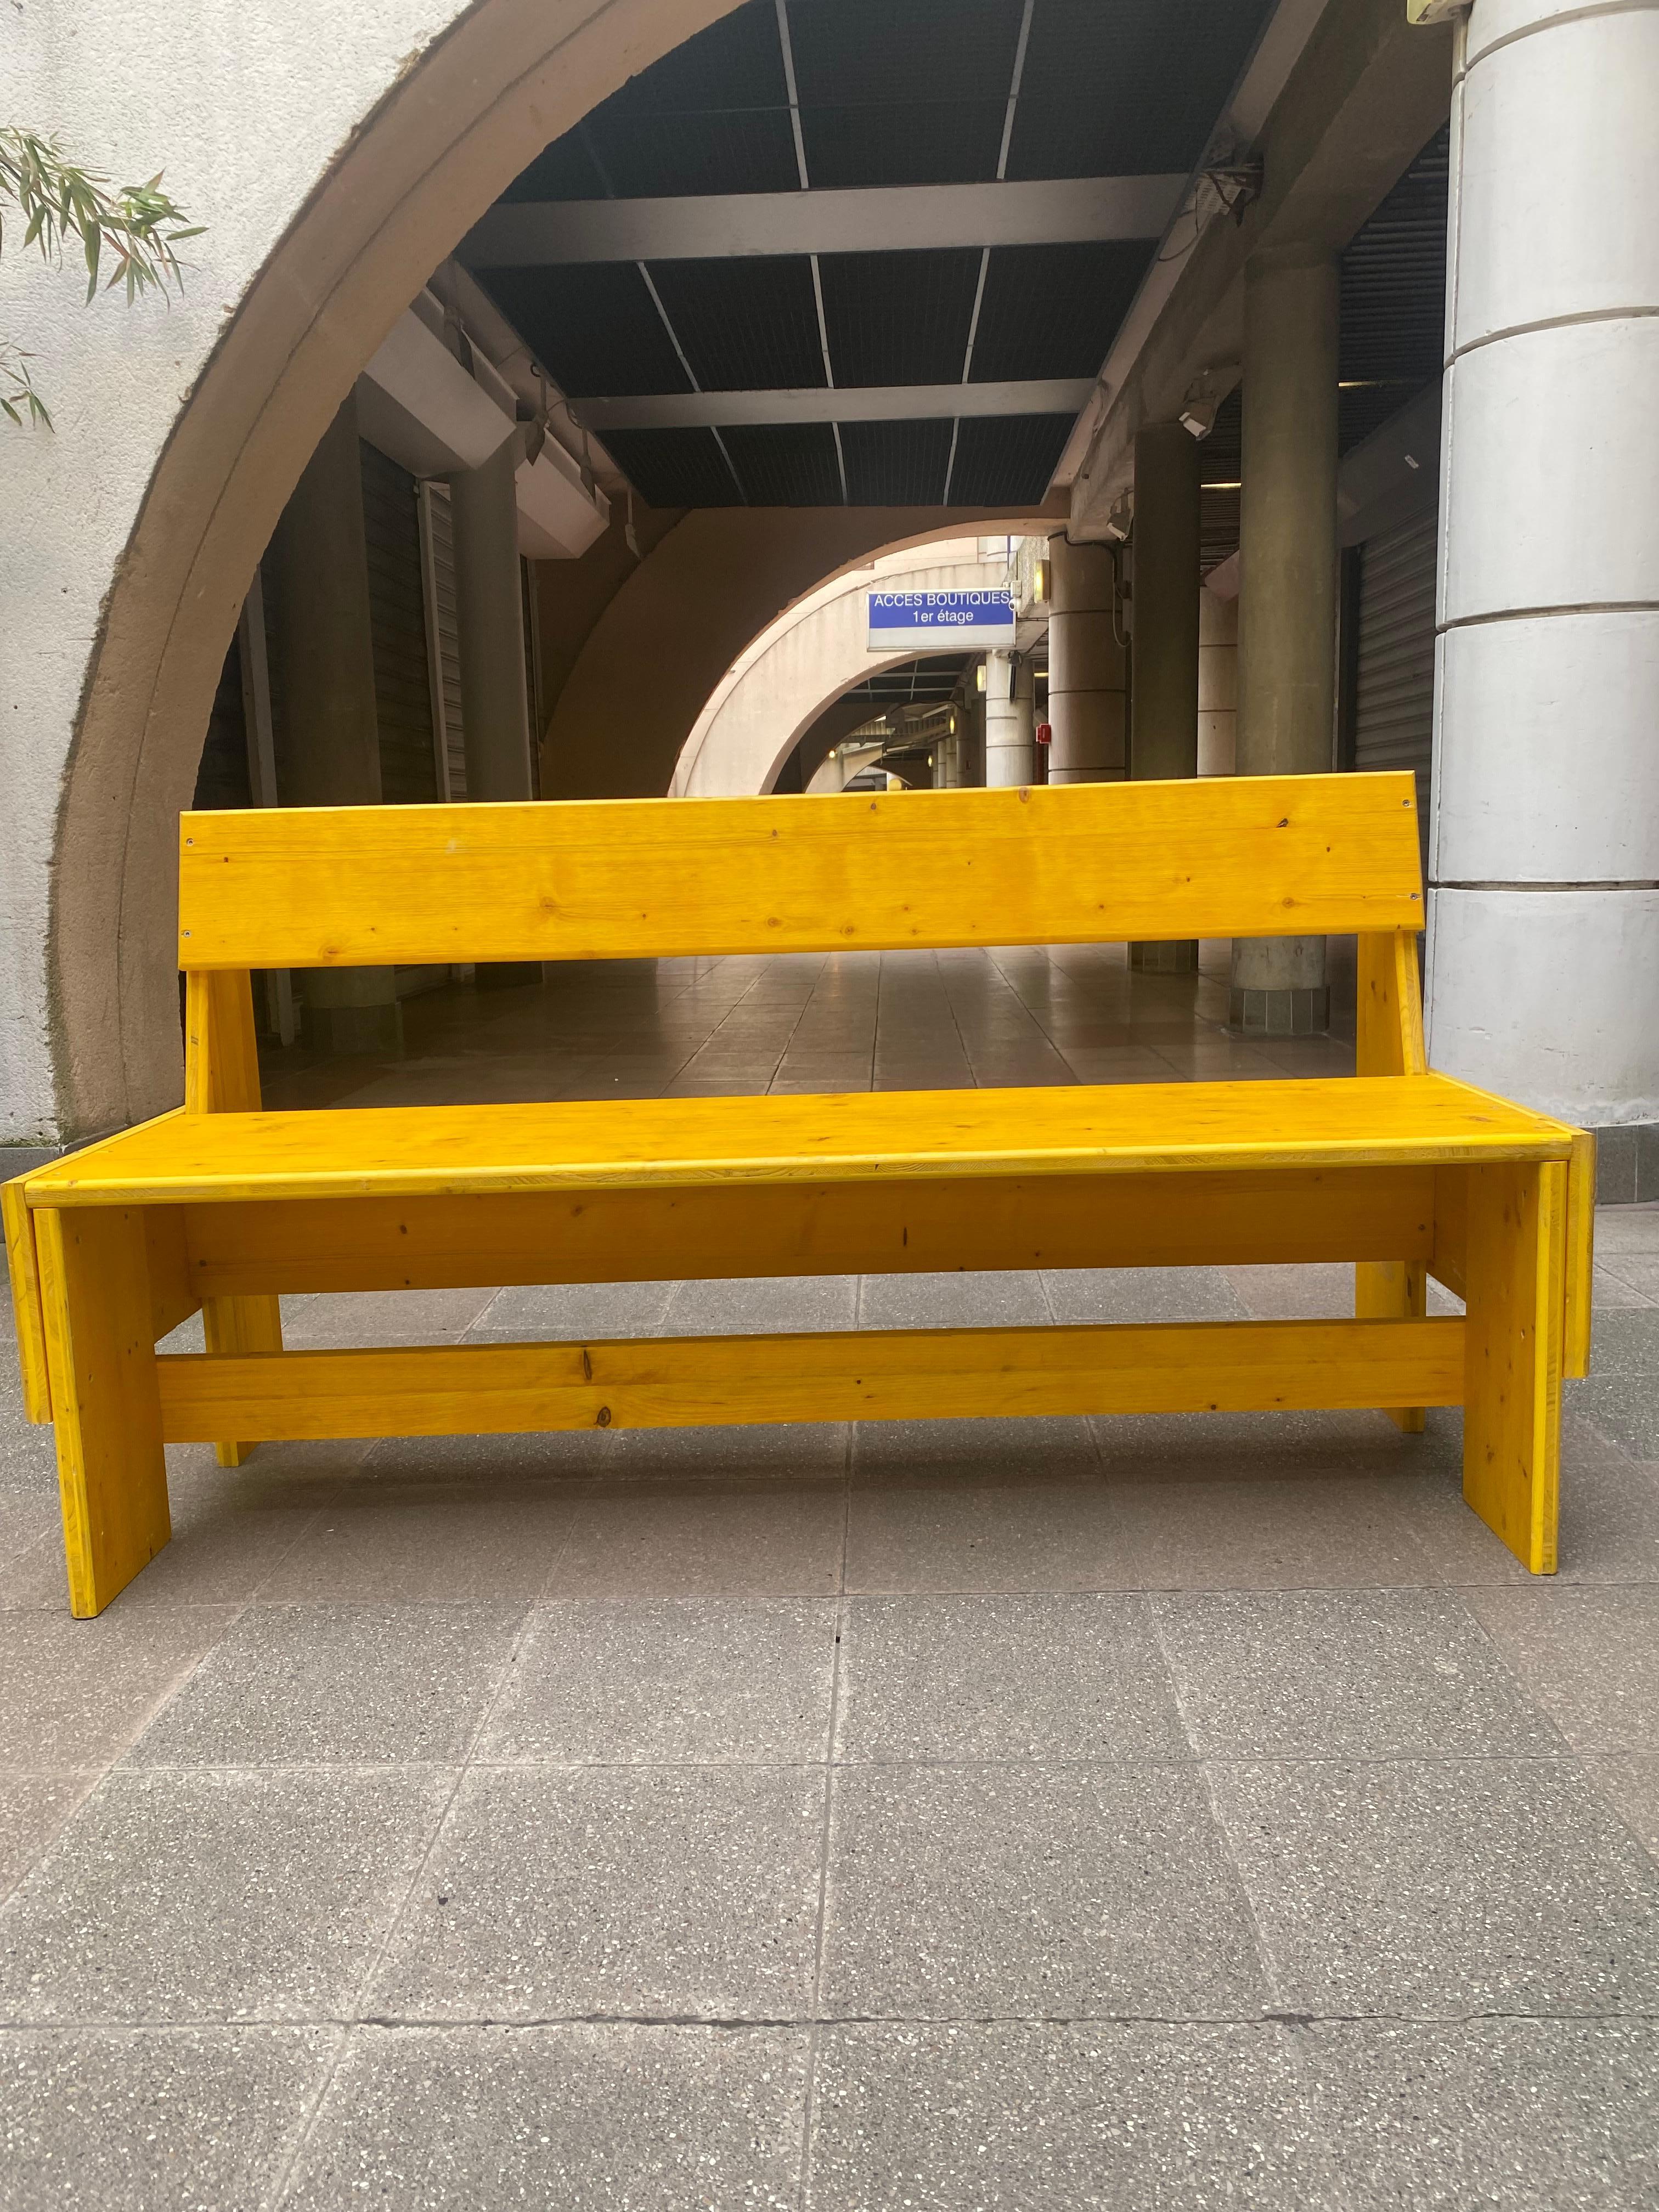 Inessa Hansch
Bench called Alcôve - Circa 2010
From the Seguin collection
Preformed and triple folded formwork panel
Melamine resin
Designed for the Ile Seguin temporary garden project in Boulogne Billancourt.
Limited edition of 30